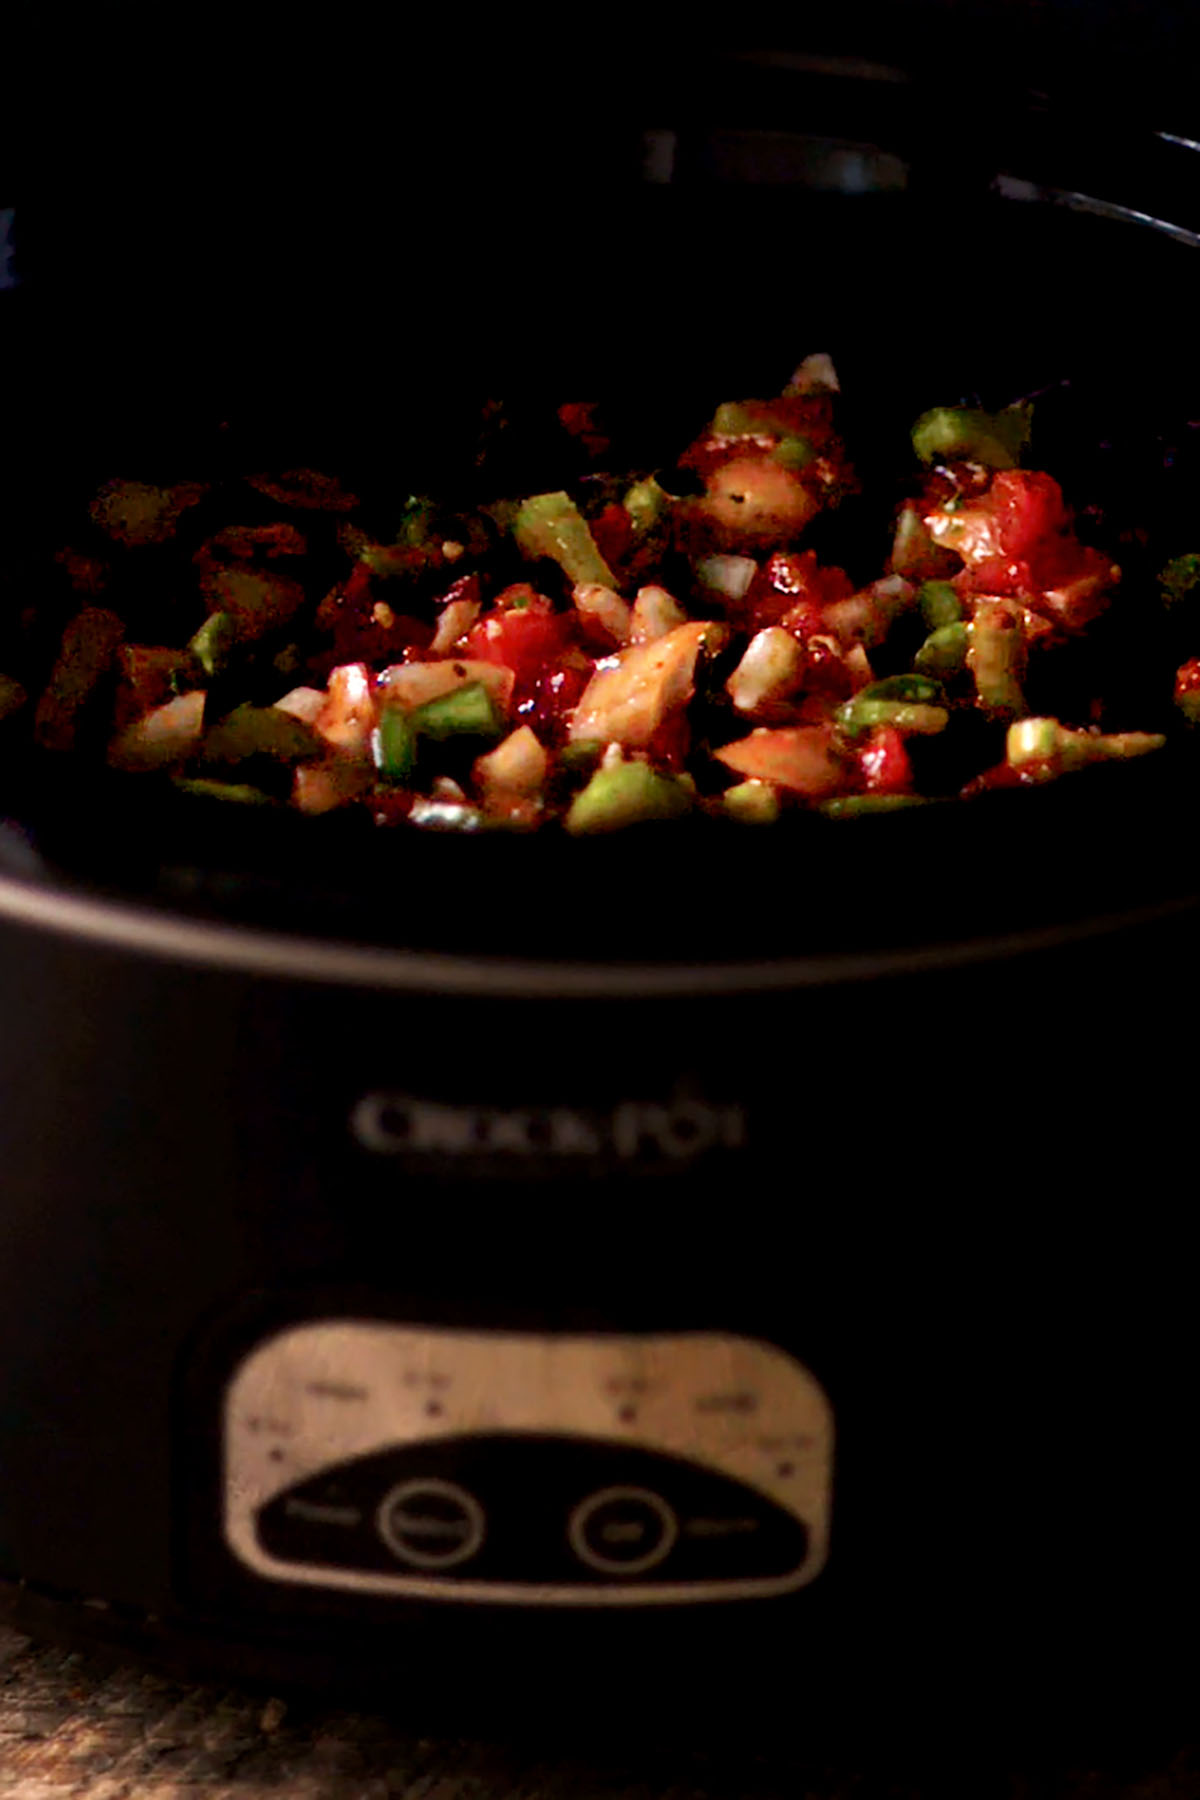 Diced vegetables added to a slow cooker.